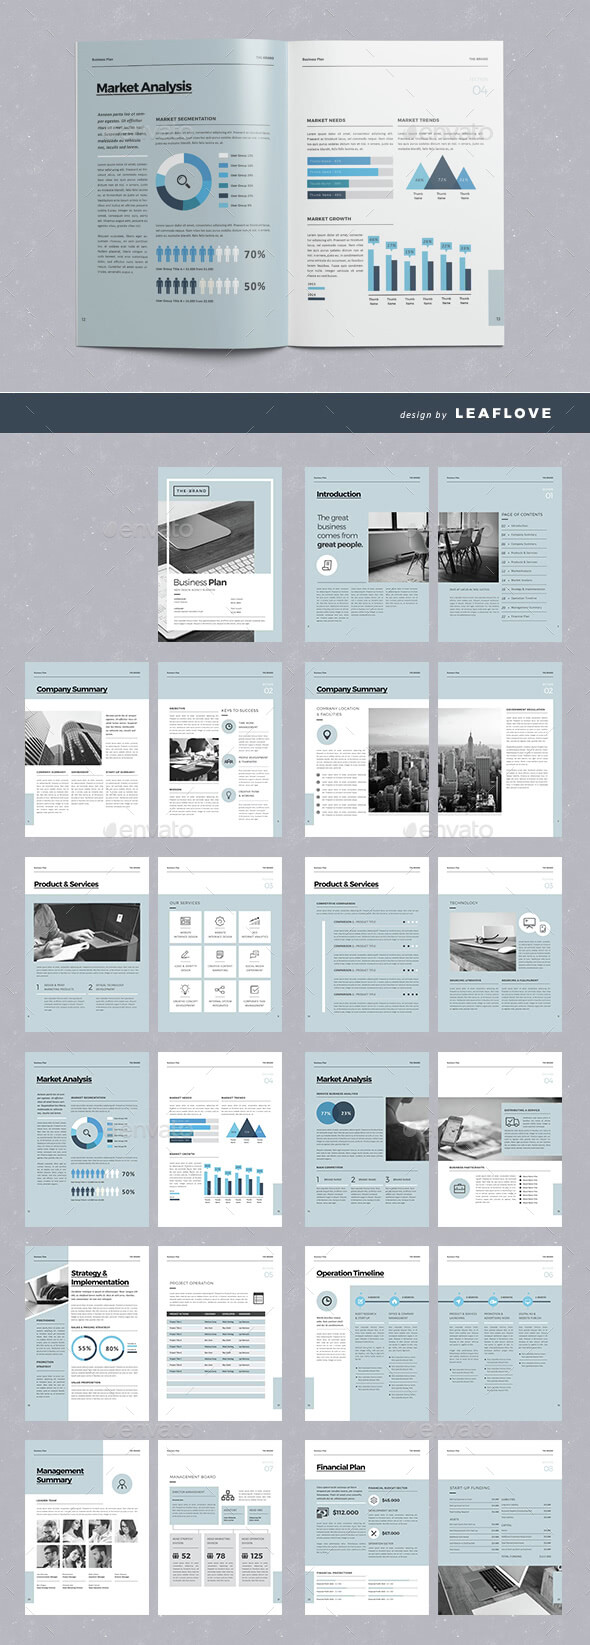 65 Fresh Indesign Templates And Where To Find More Intended For Free Indesign Report Templates